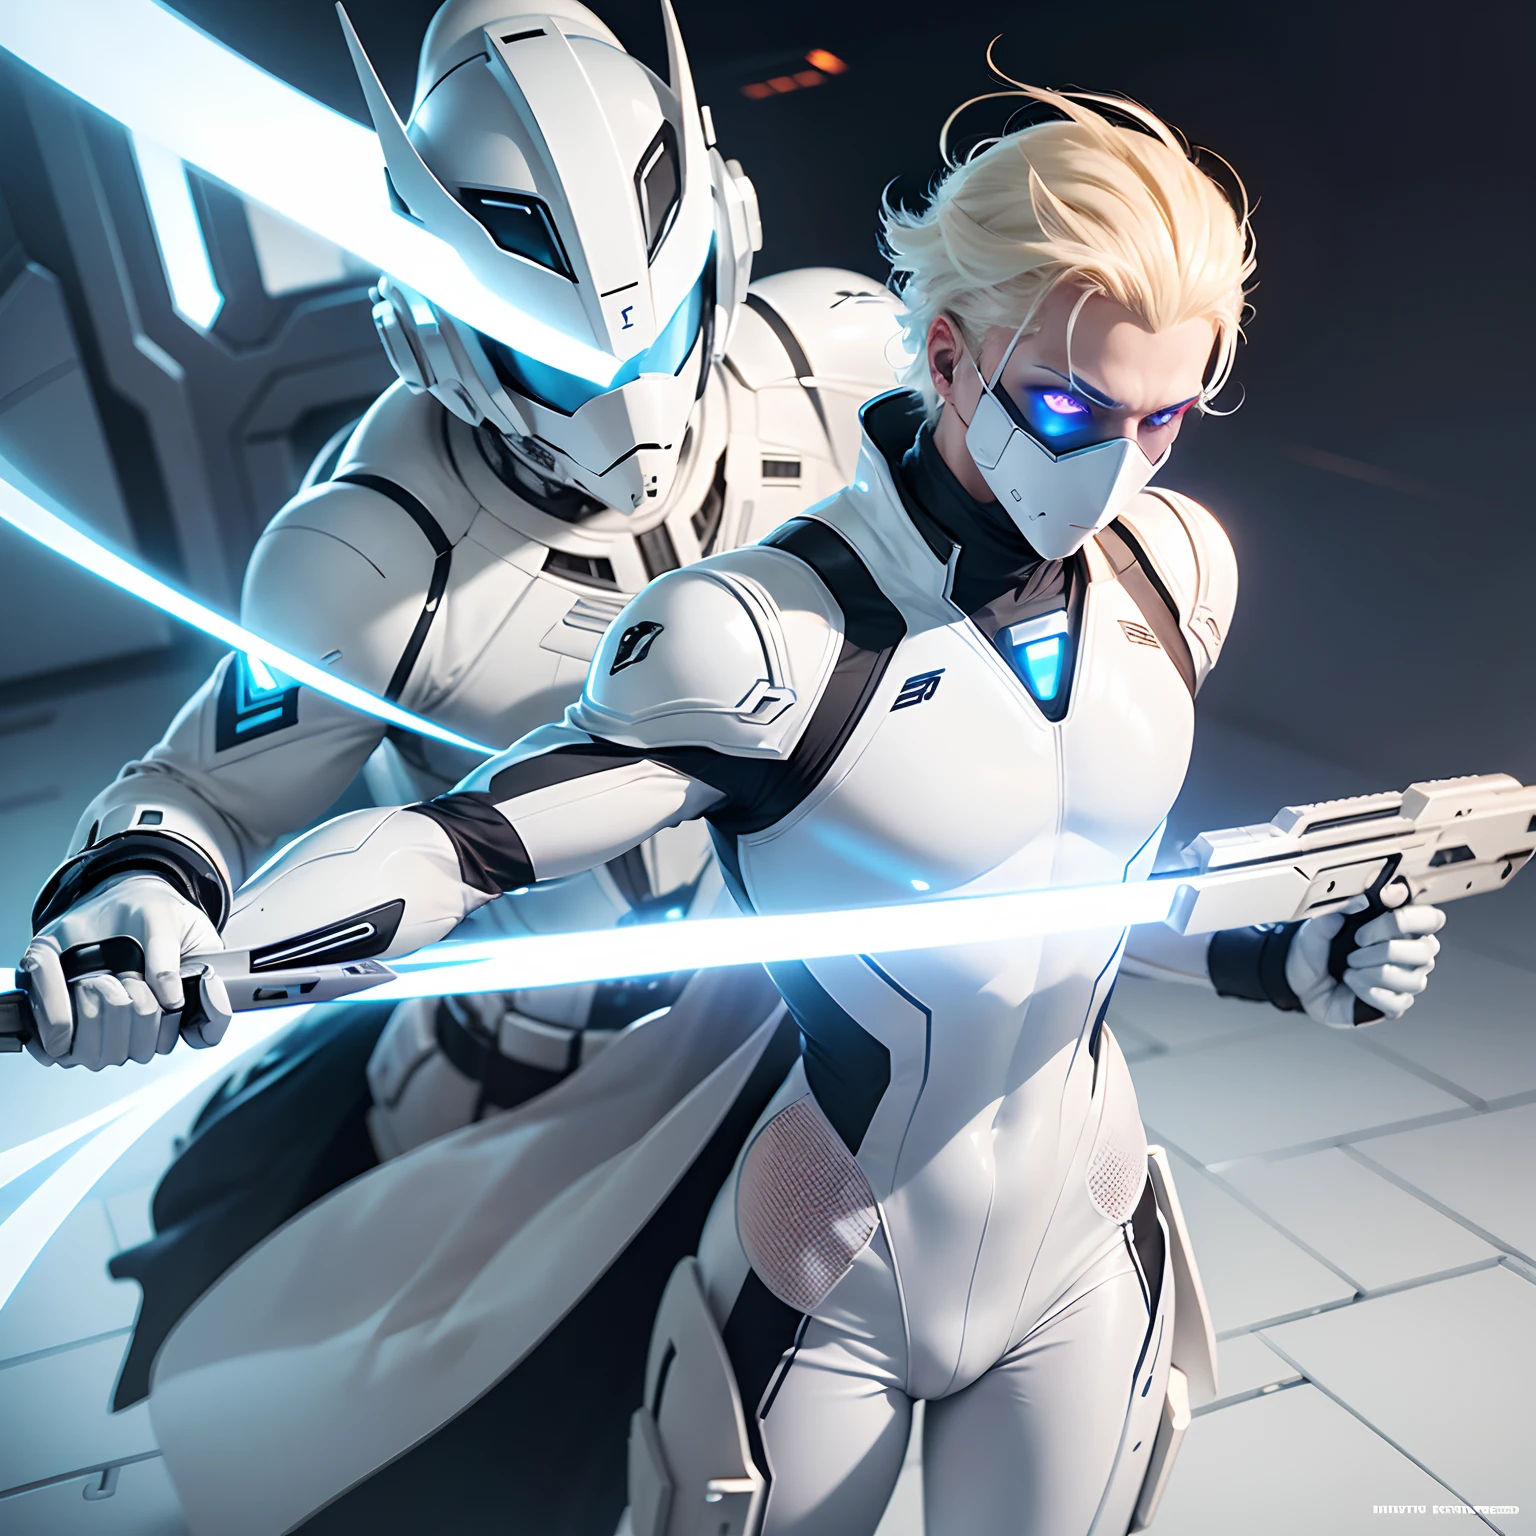 futuristic, sci fi)Male in all white body suit, blonde hair, white gloves,  full body suit - SeaArt AI